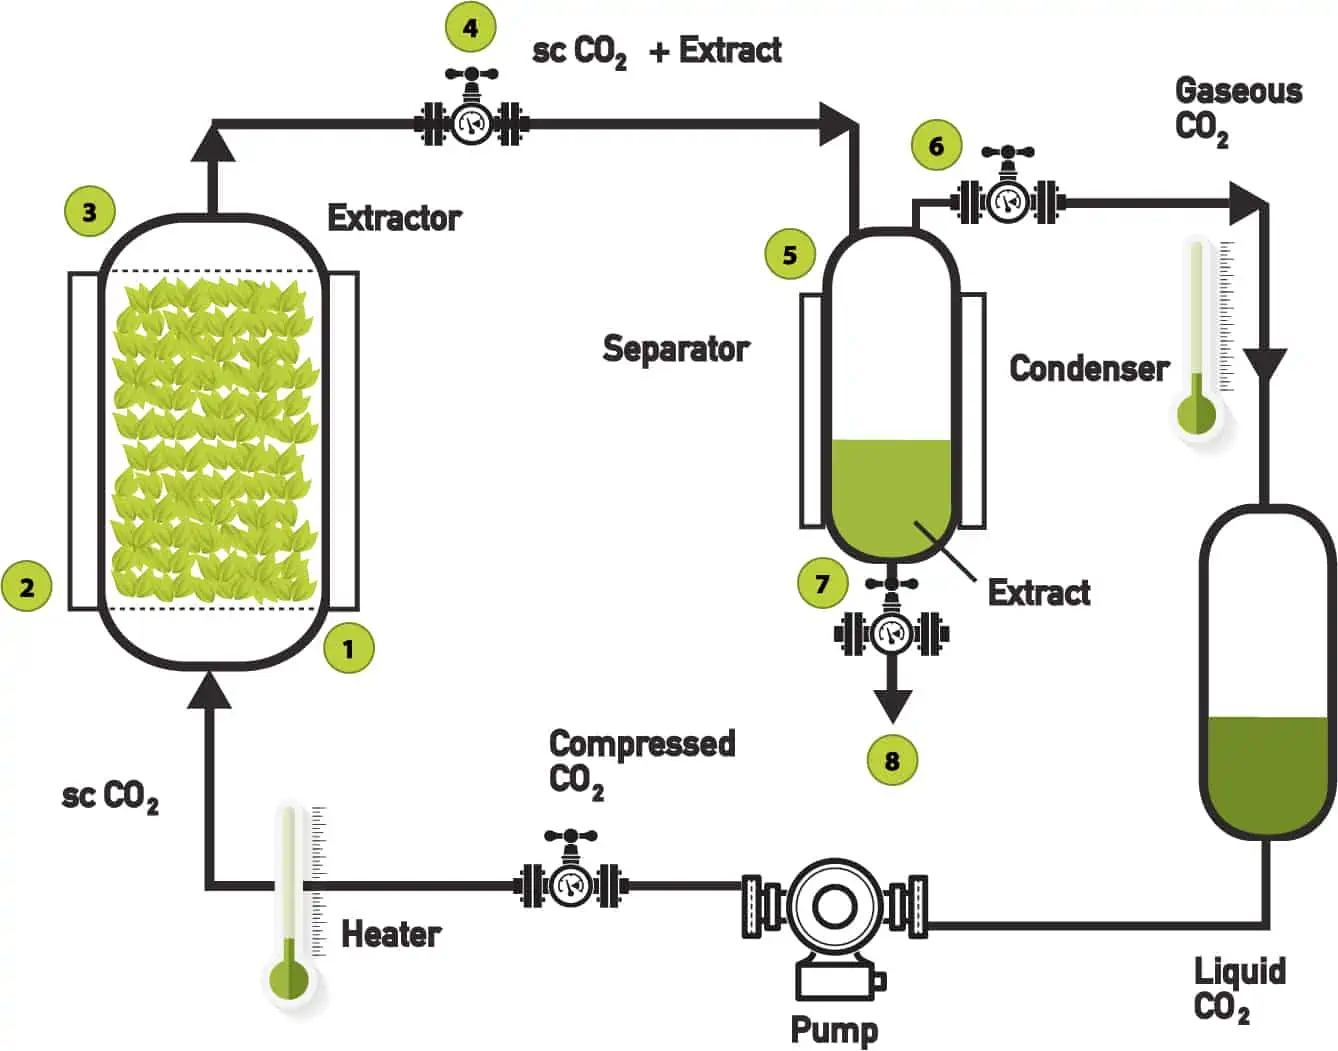 scco2-extraction-process-graph